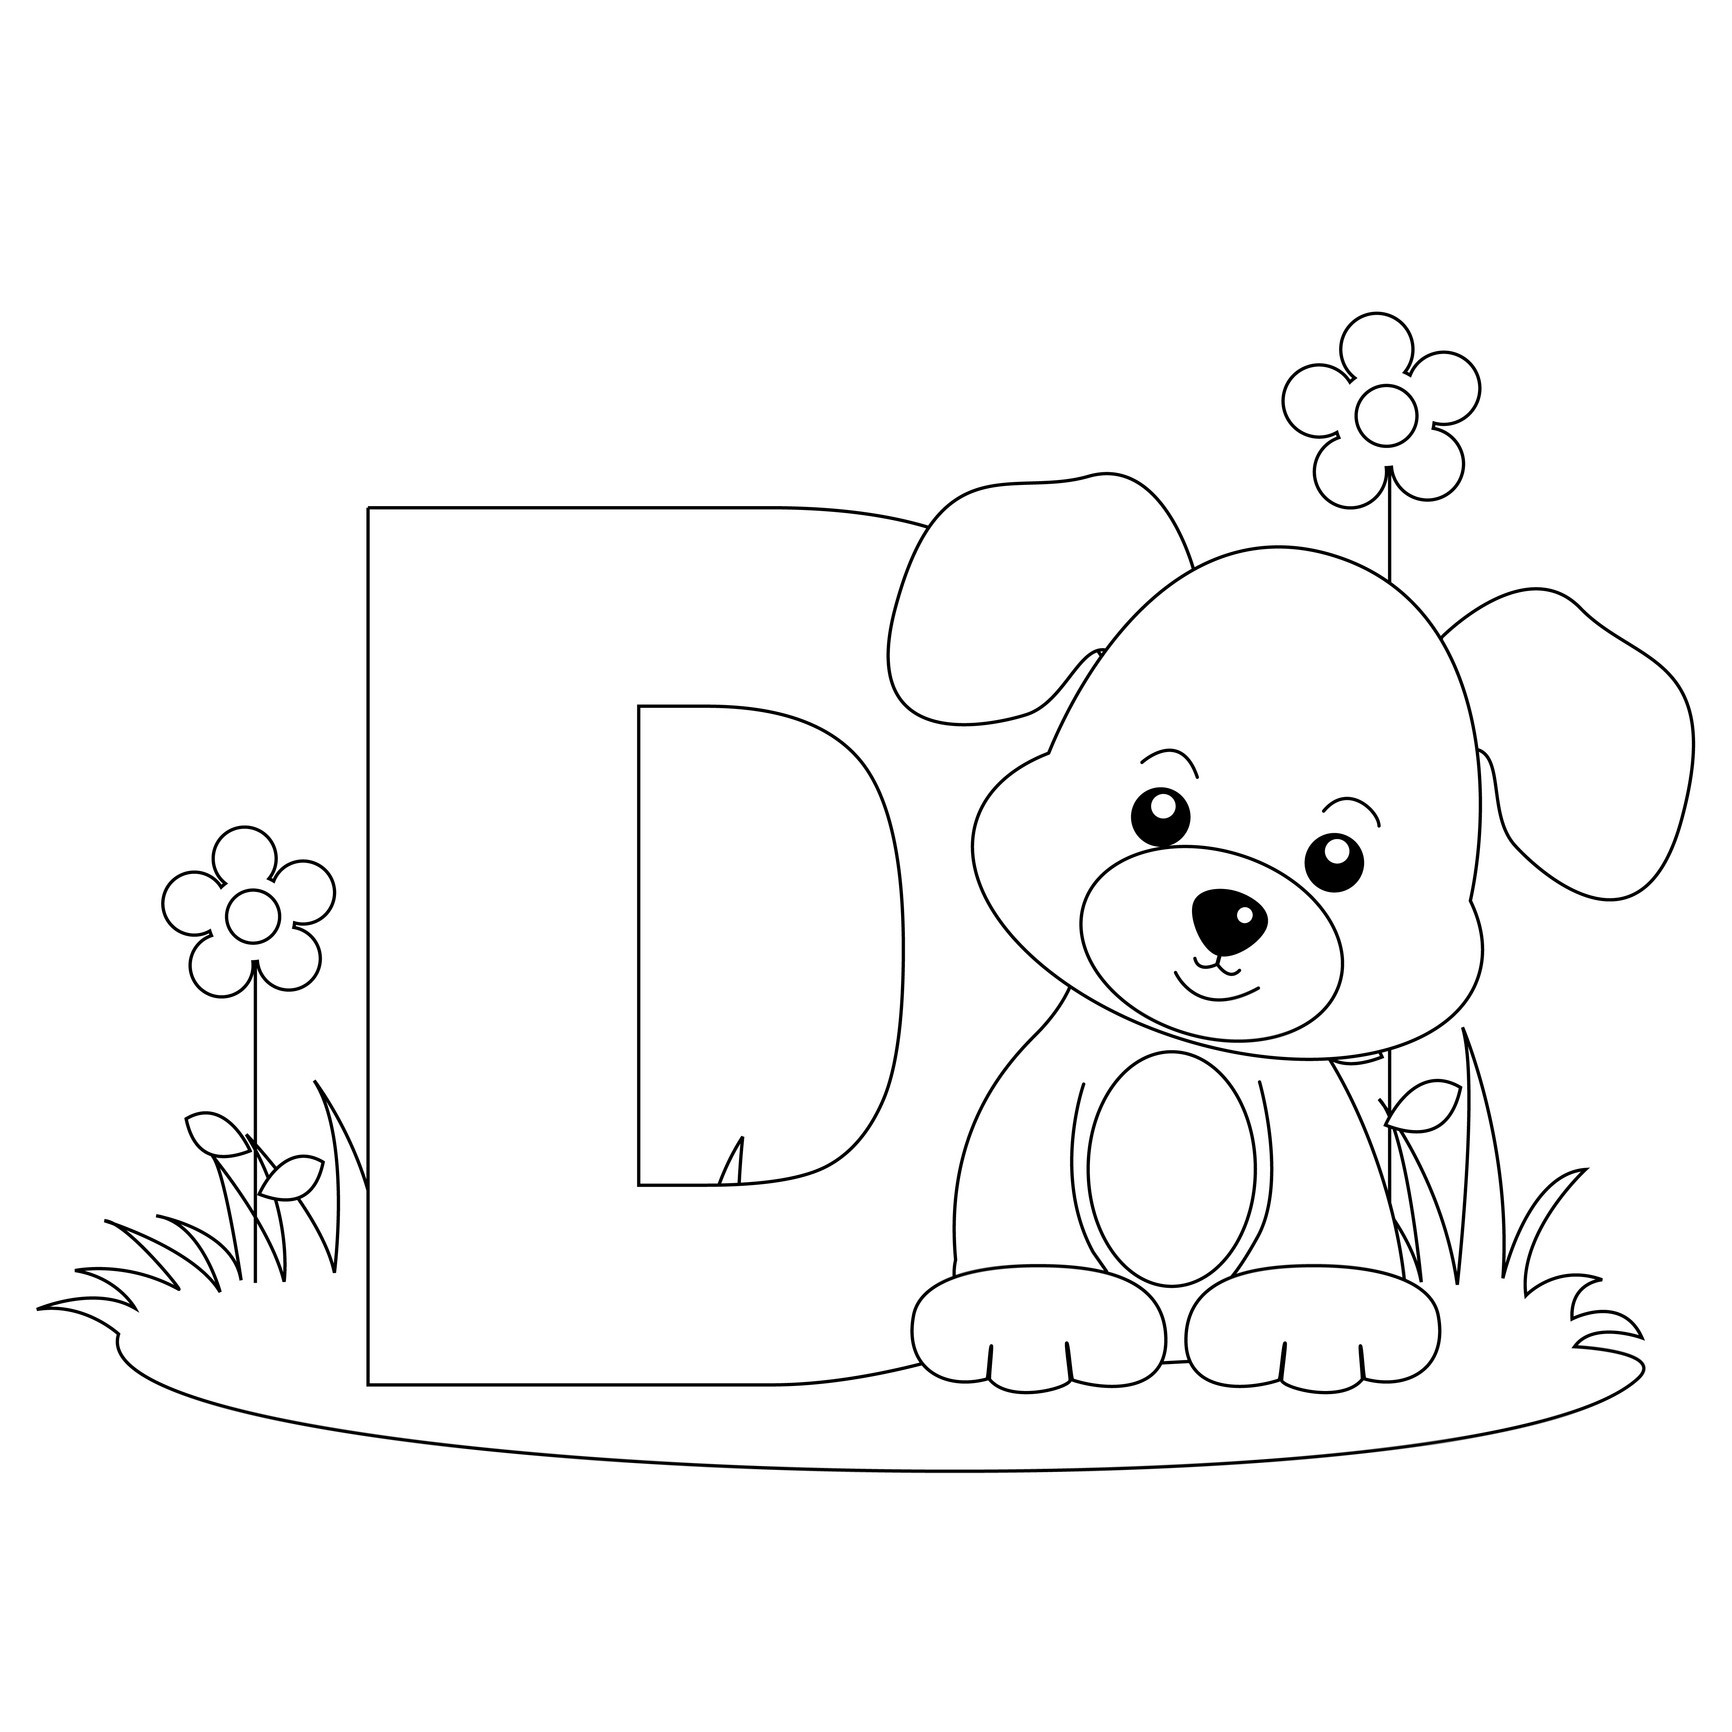 Free Printable Alphabet Coloring Pages for Kids - Best Coloring Pages